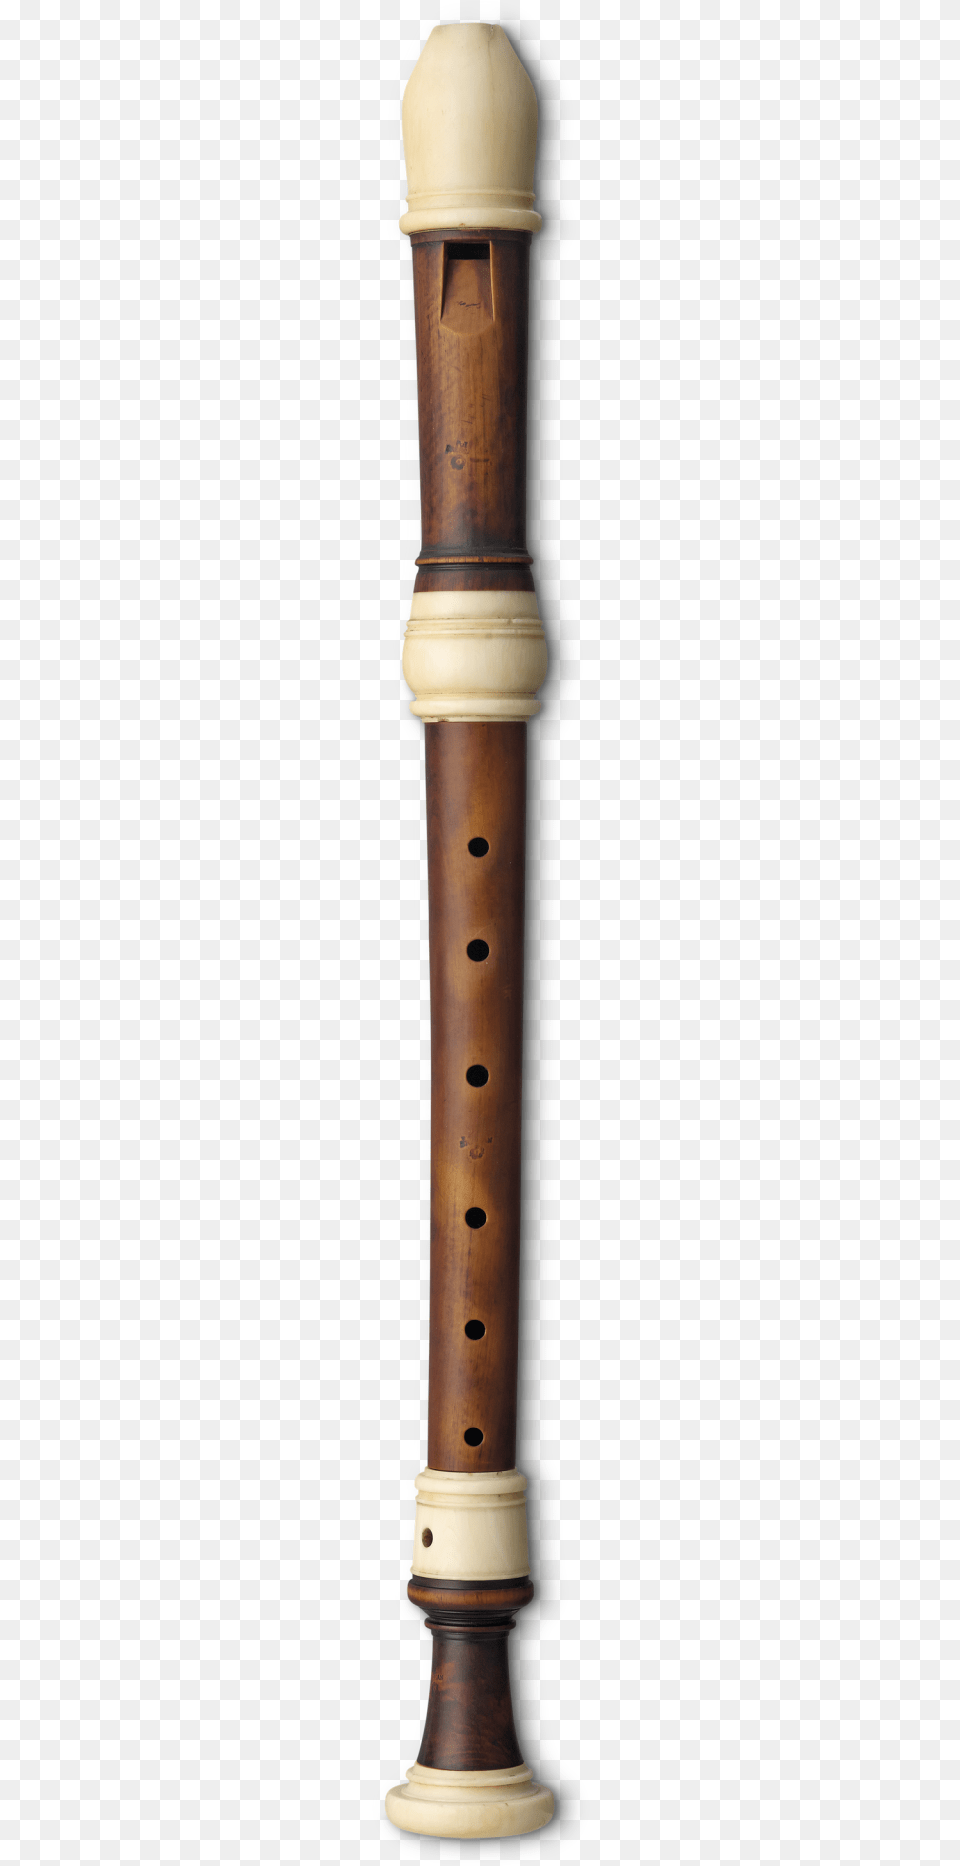 Recorder Flute, Musical Instrument, Oboe, Mace Club, Weapon Png